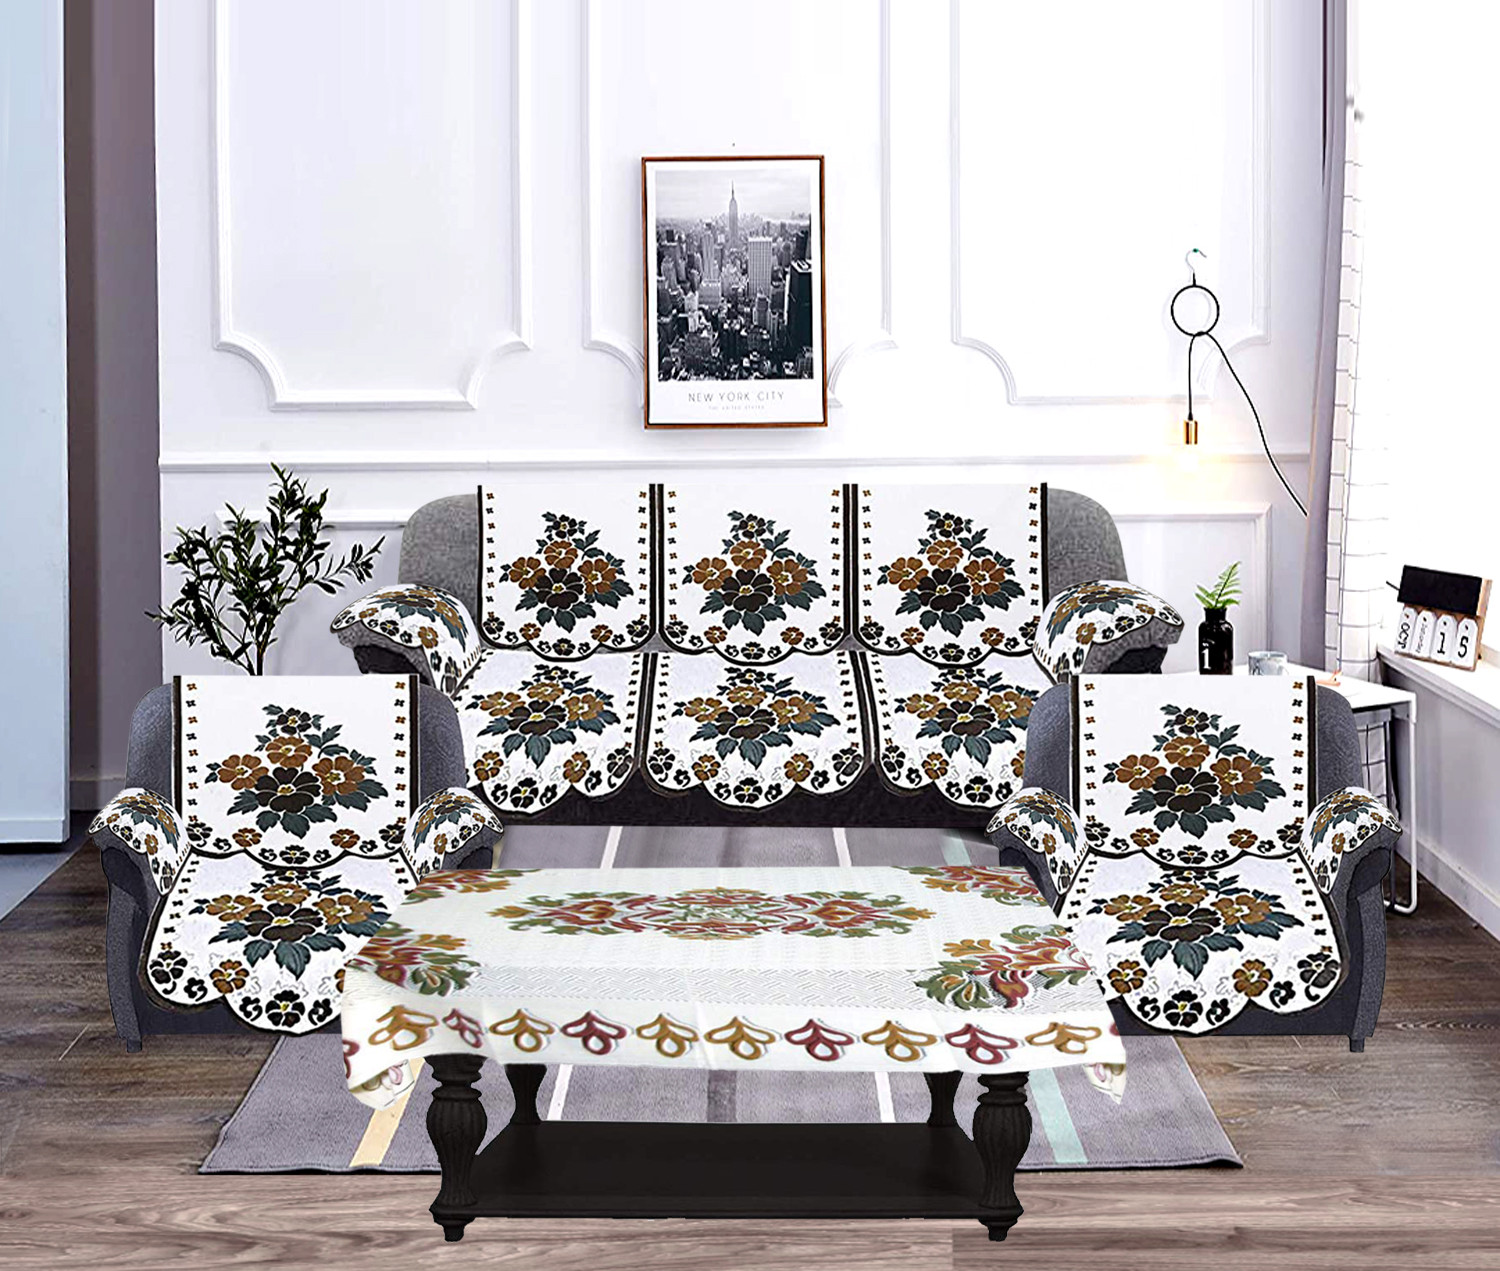 Kuber Industries Flower Design Cotton 5 Seater Sofa Cover With 6 Pieces Arms cover And 1 Center Table Cover Use Both Side, Living Room, Drawing Room, Bedroom, Guest Room (Set Of17, White & Brown)-KUBMRT12029